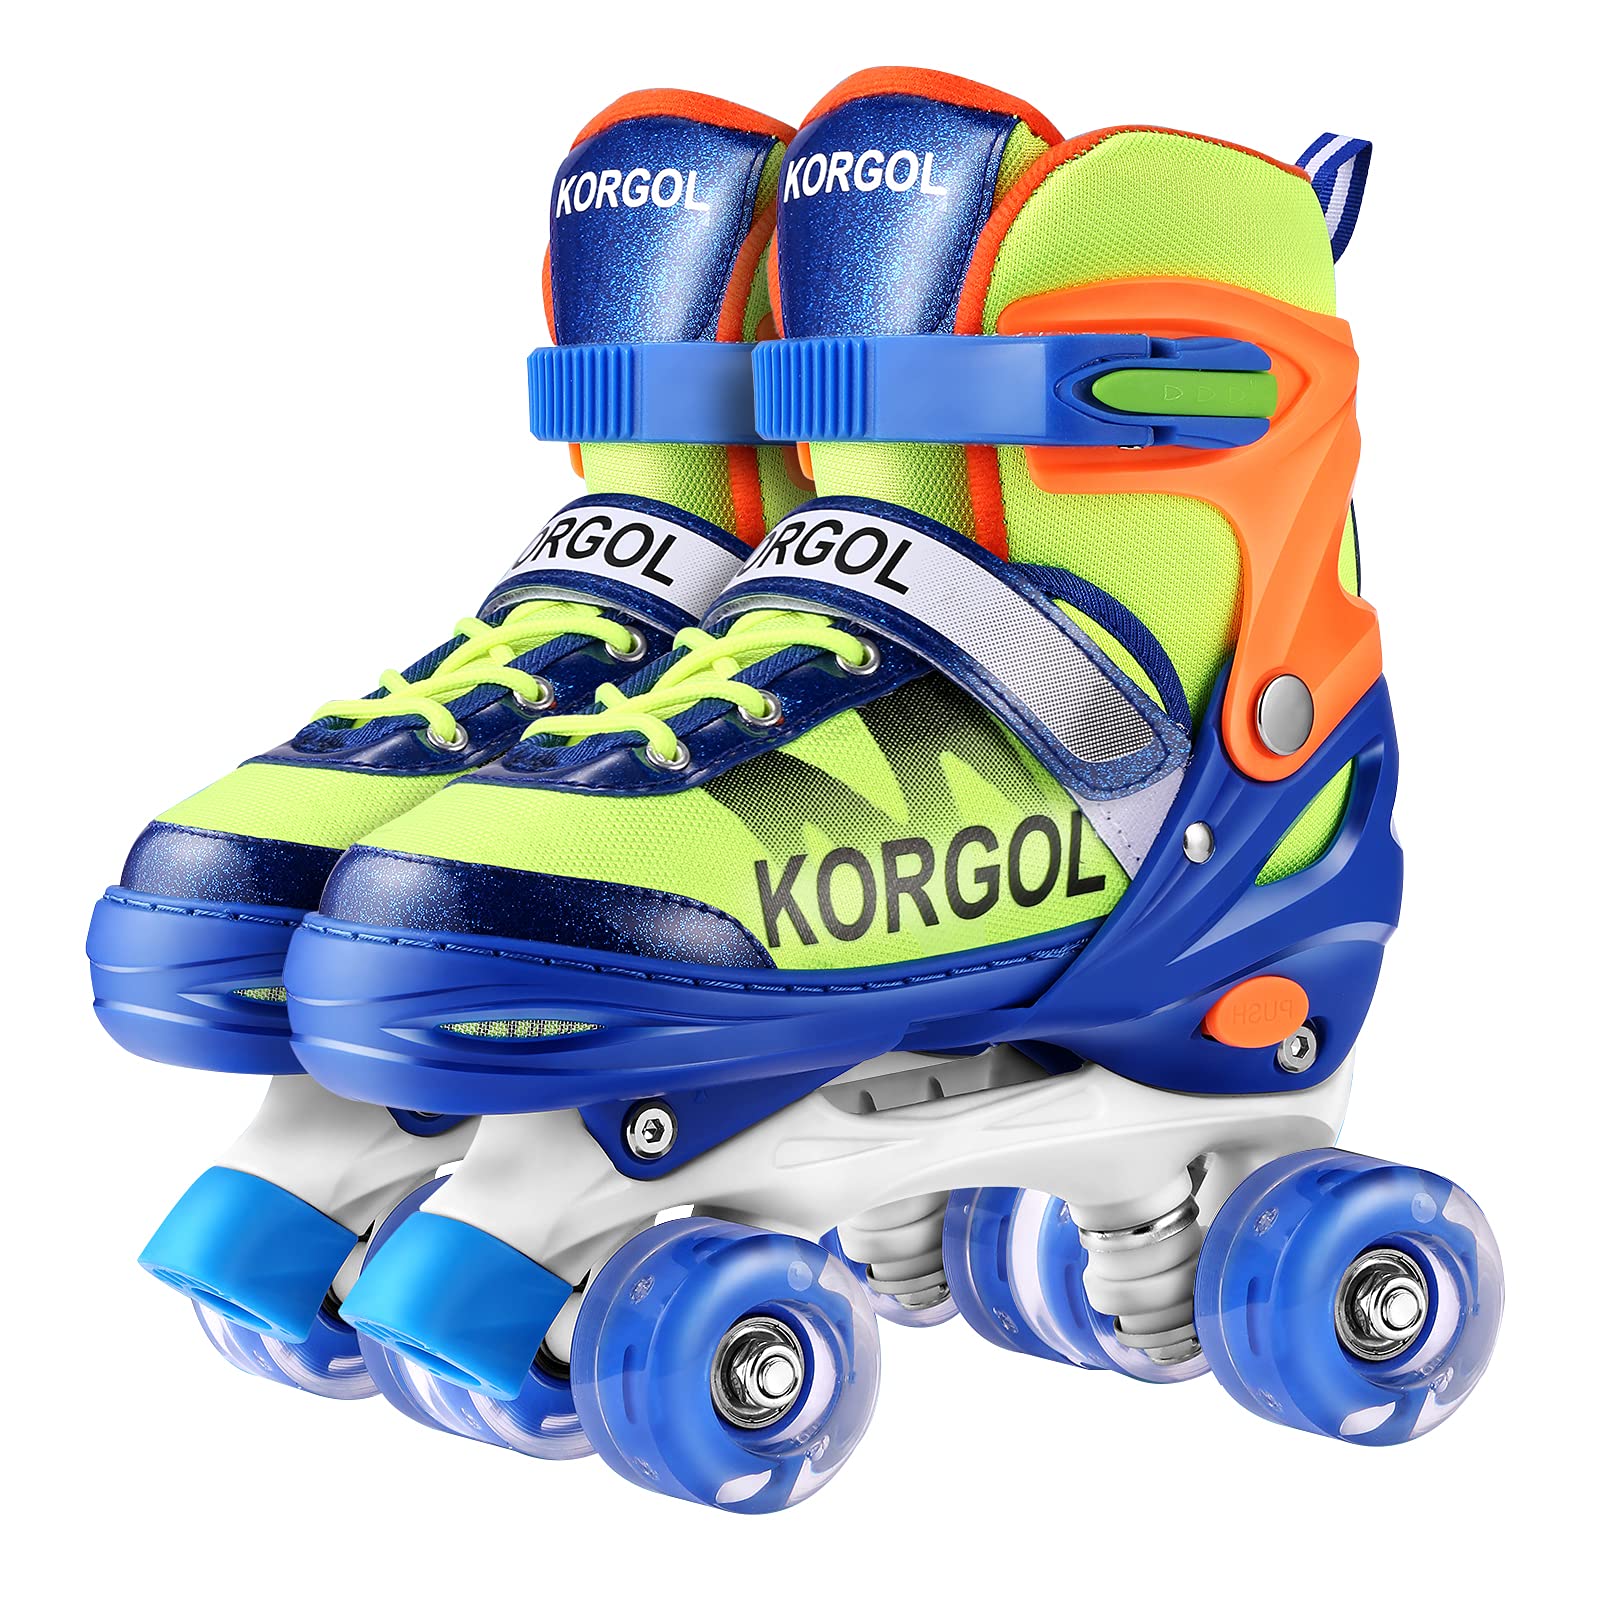 Roller Skates for Kids, Adjustable Size Double Roller Skates with All Wheels Light up, Safe and Durable Outdoor Roller Skates for Beginners